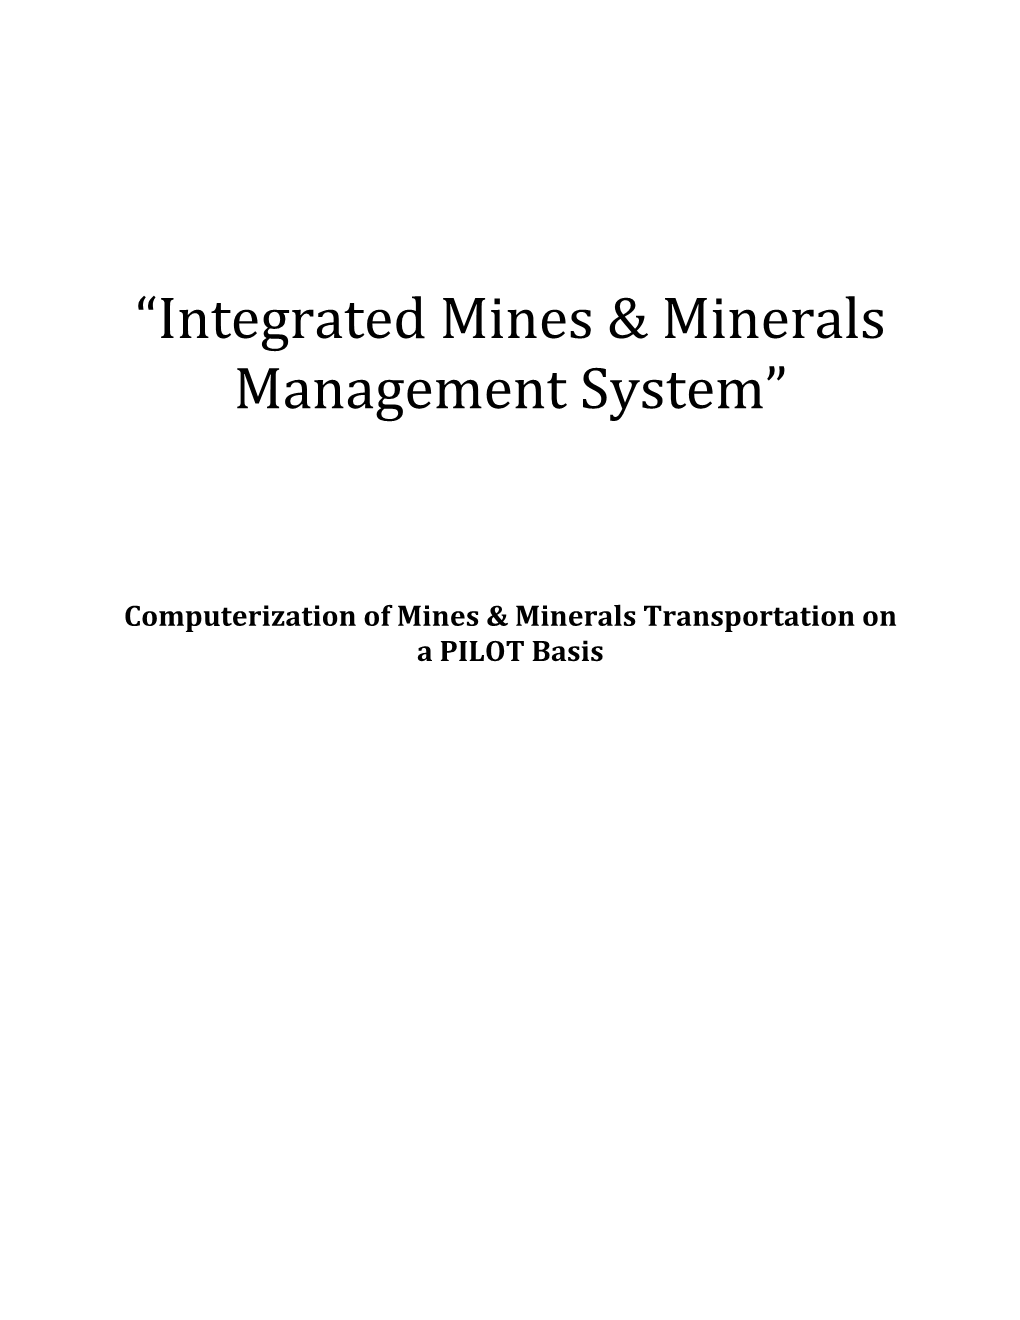 “Integrated Mines & Minerals Management System”